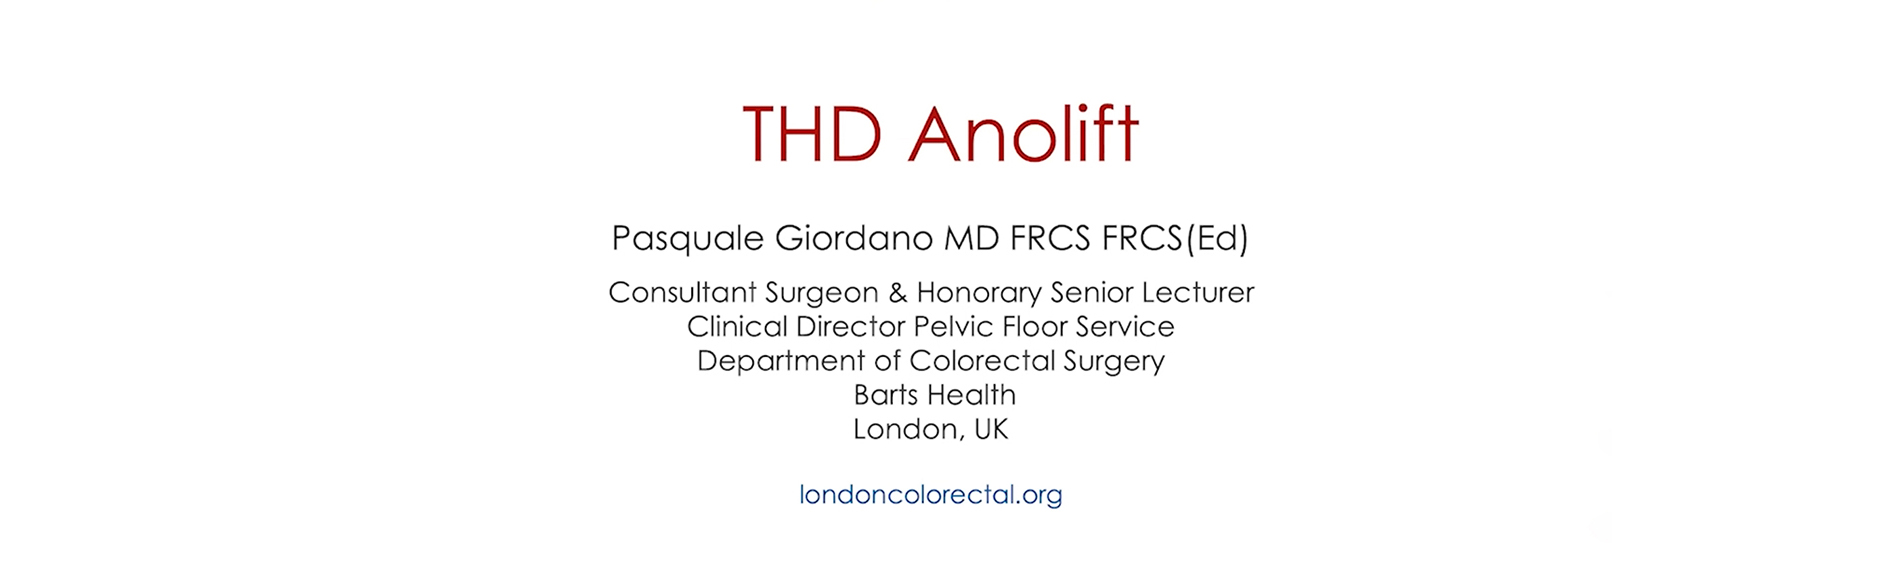 THD Masterclass on THD Anolift by Dr. Pasquale Giordano